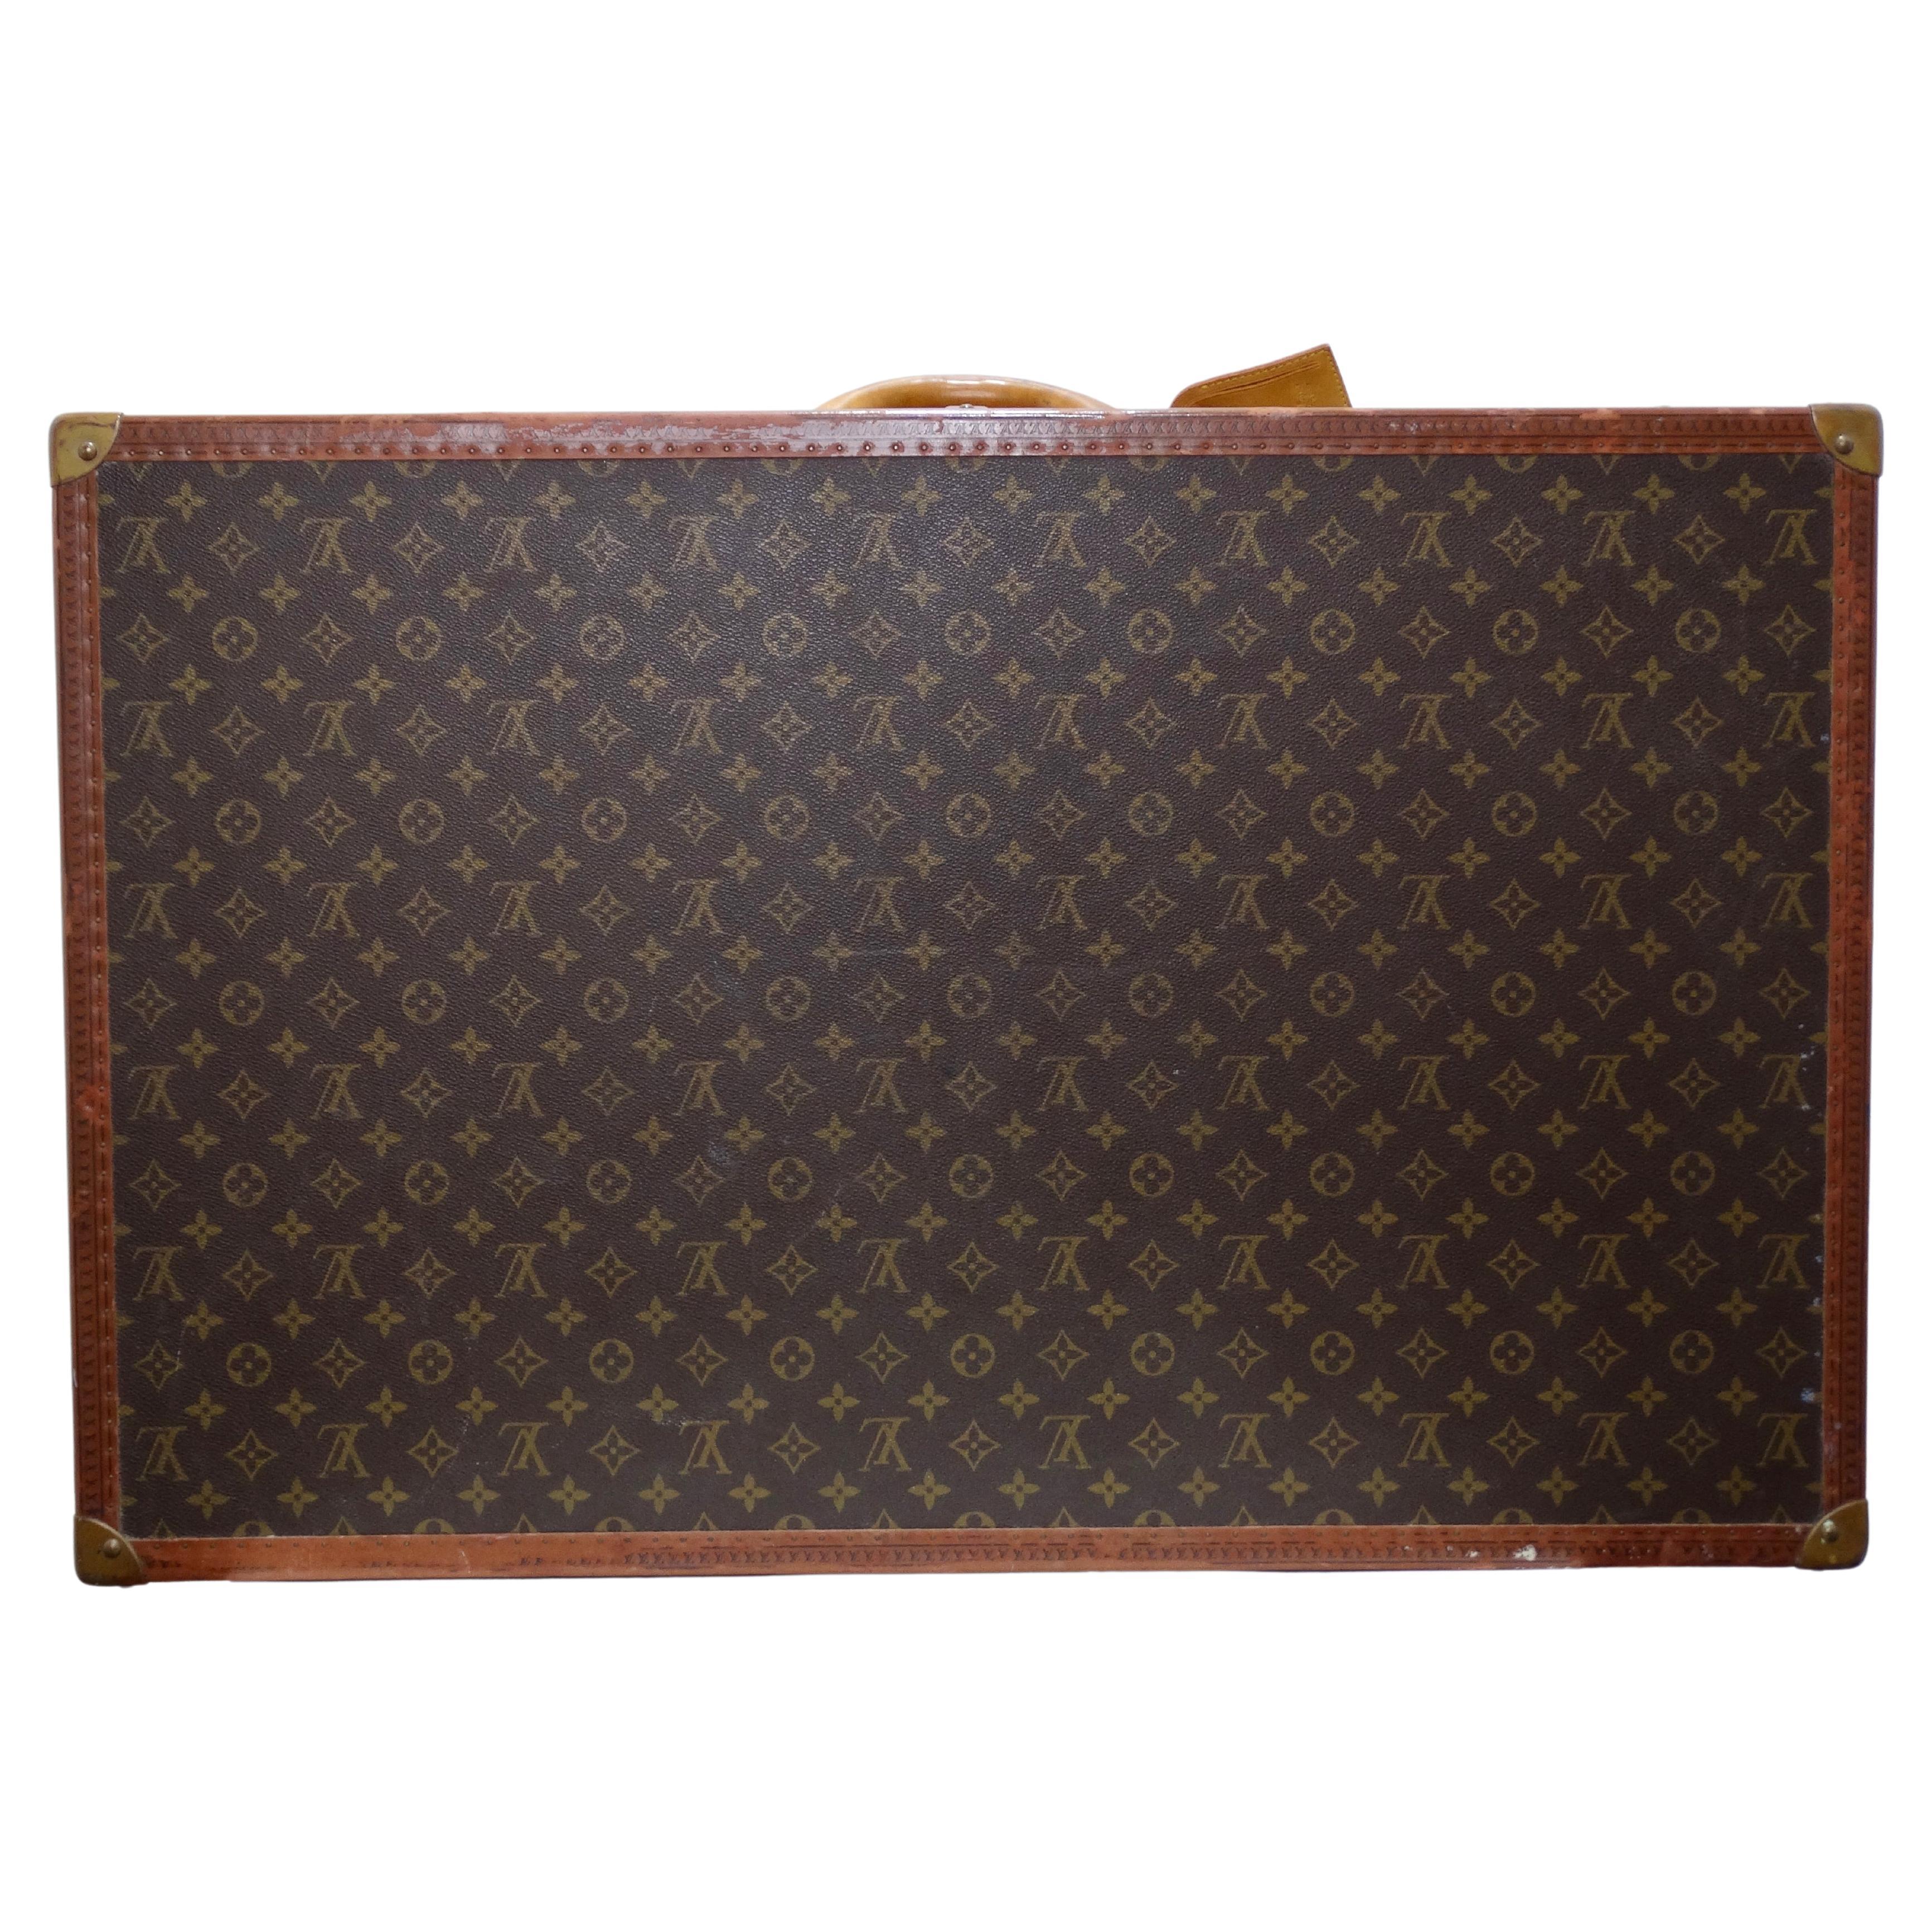 This is an amazing vintage find! Nothing is better than vintage Louis Vuitton because the brown leather ages beautifully and only gets better! This is a charming Louis Vuitton hard-sided case from the mid to late 20th century. This suitcase is in